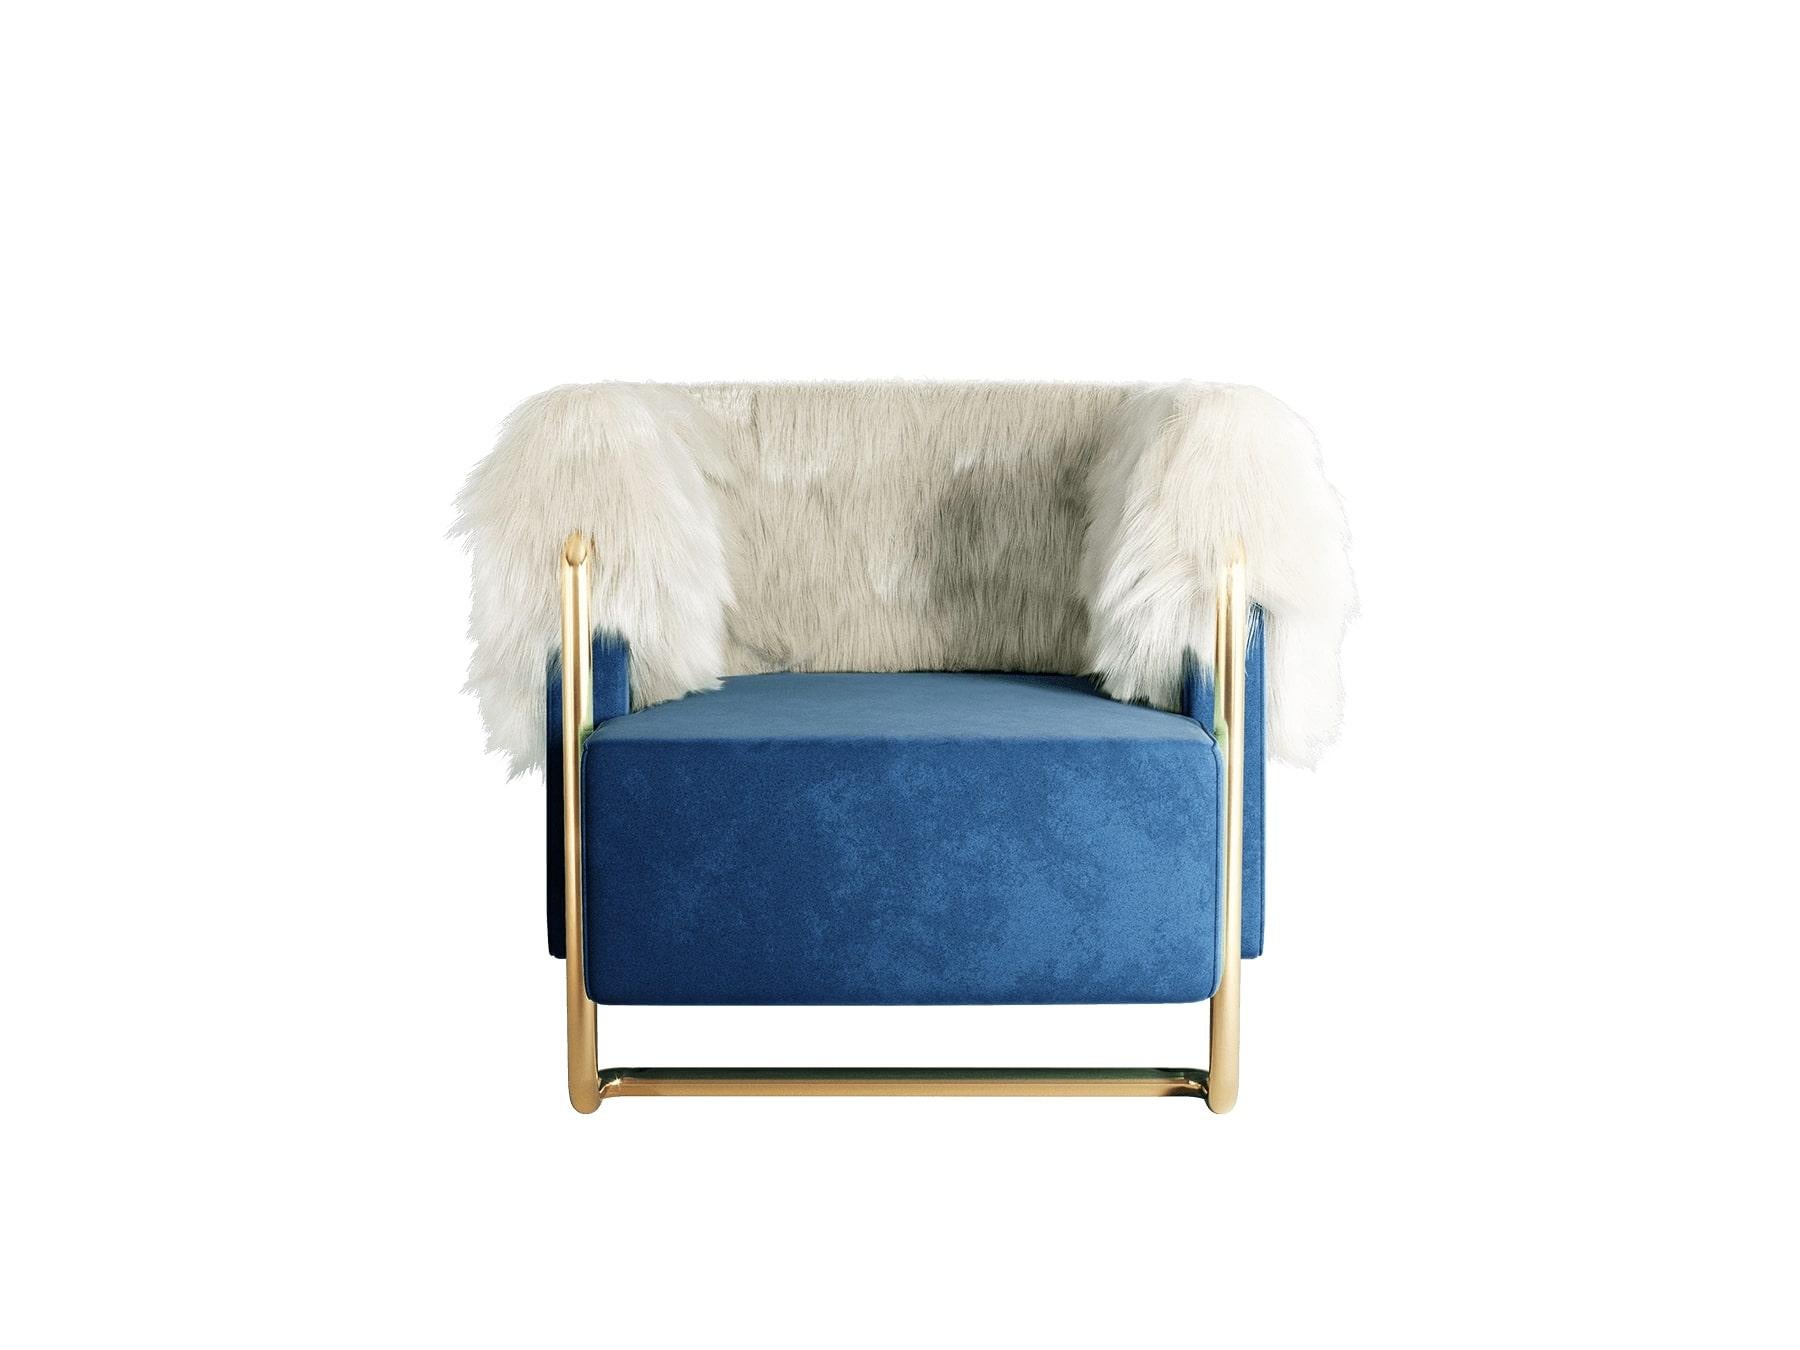 Max Armchair is a modern mid-century style armchair. This modern armchair brings details from the old days to contemporary design. The armchair design shape and exquisite materials like the fur detail make it a great accent armchair.

Materials: